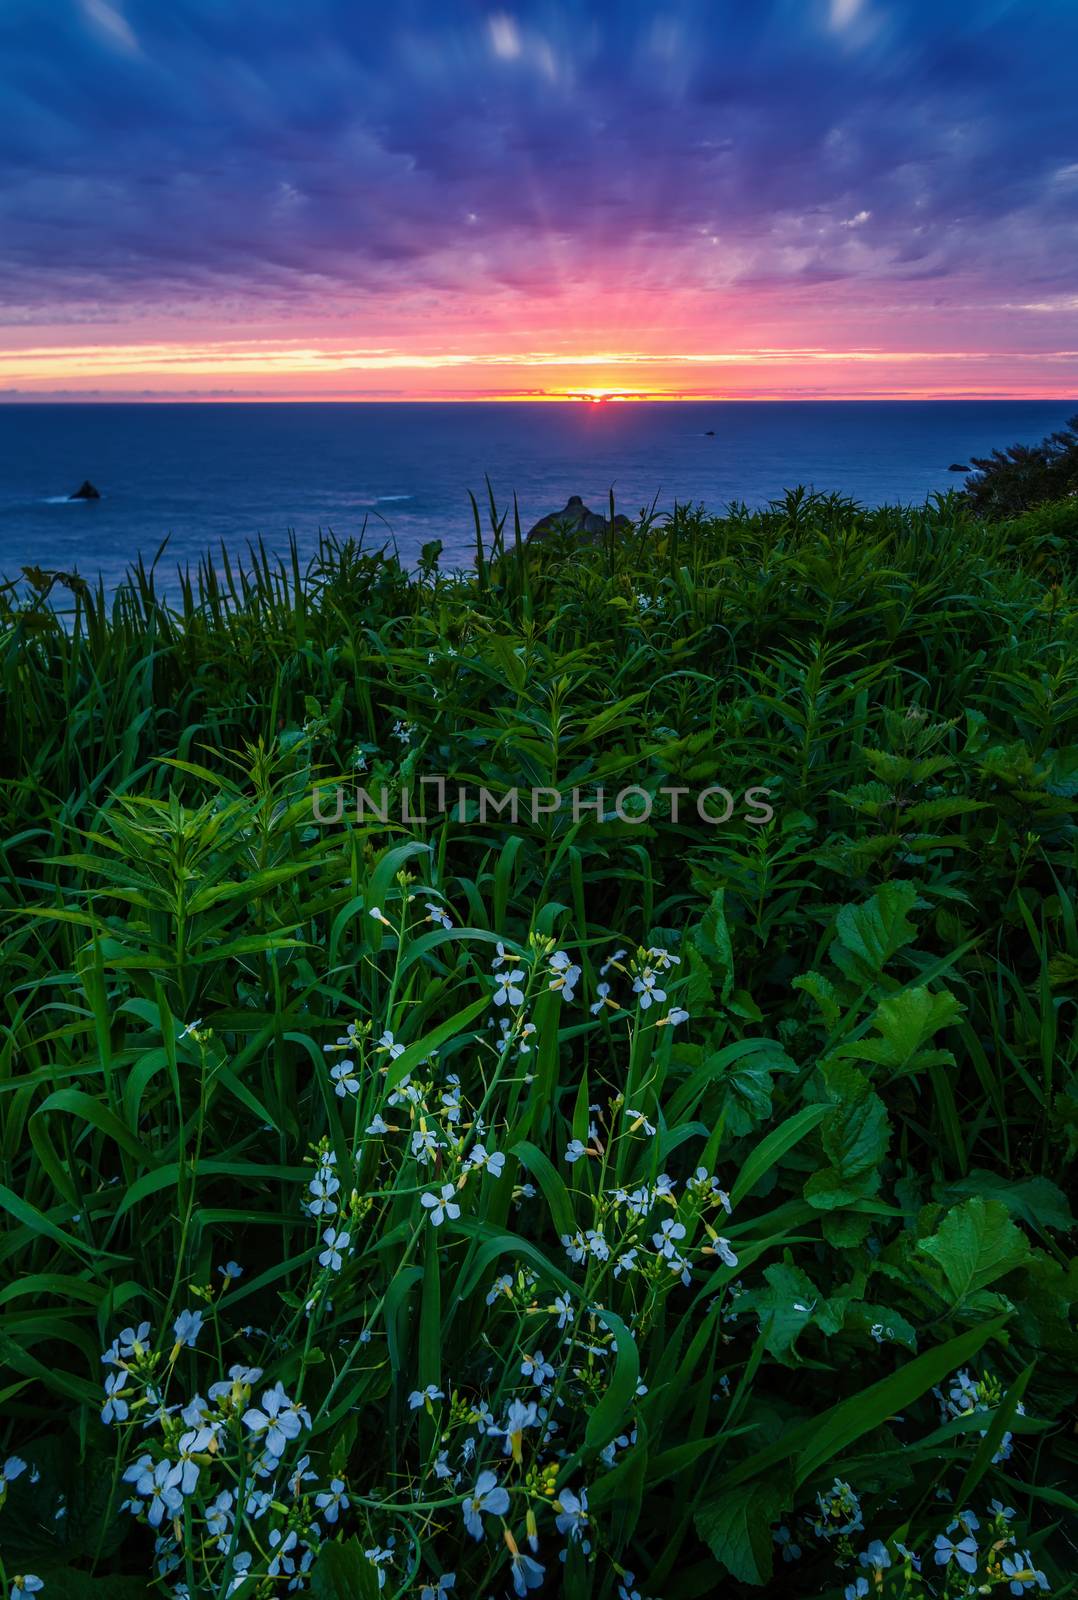 A Seascape Sunset in Humboldt County, California by backyard_photography